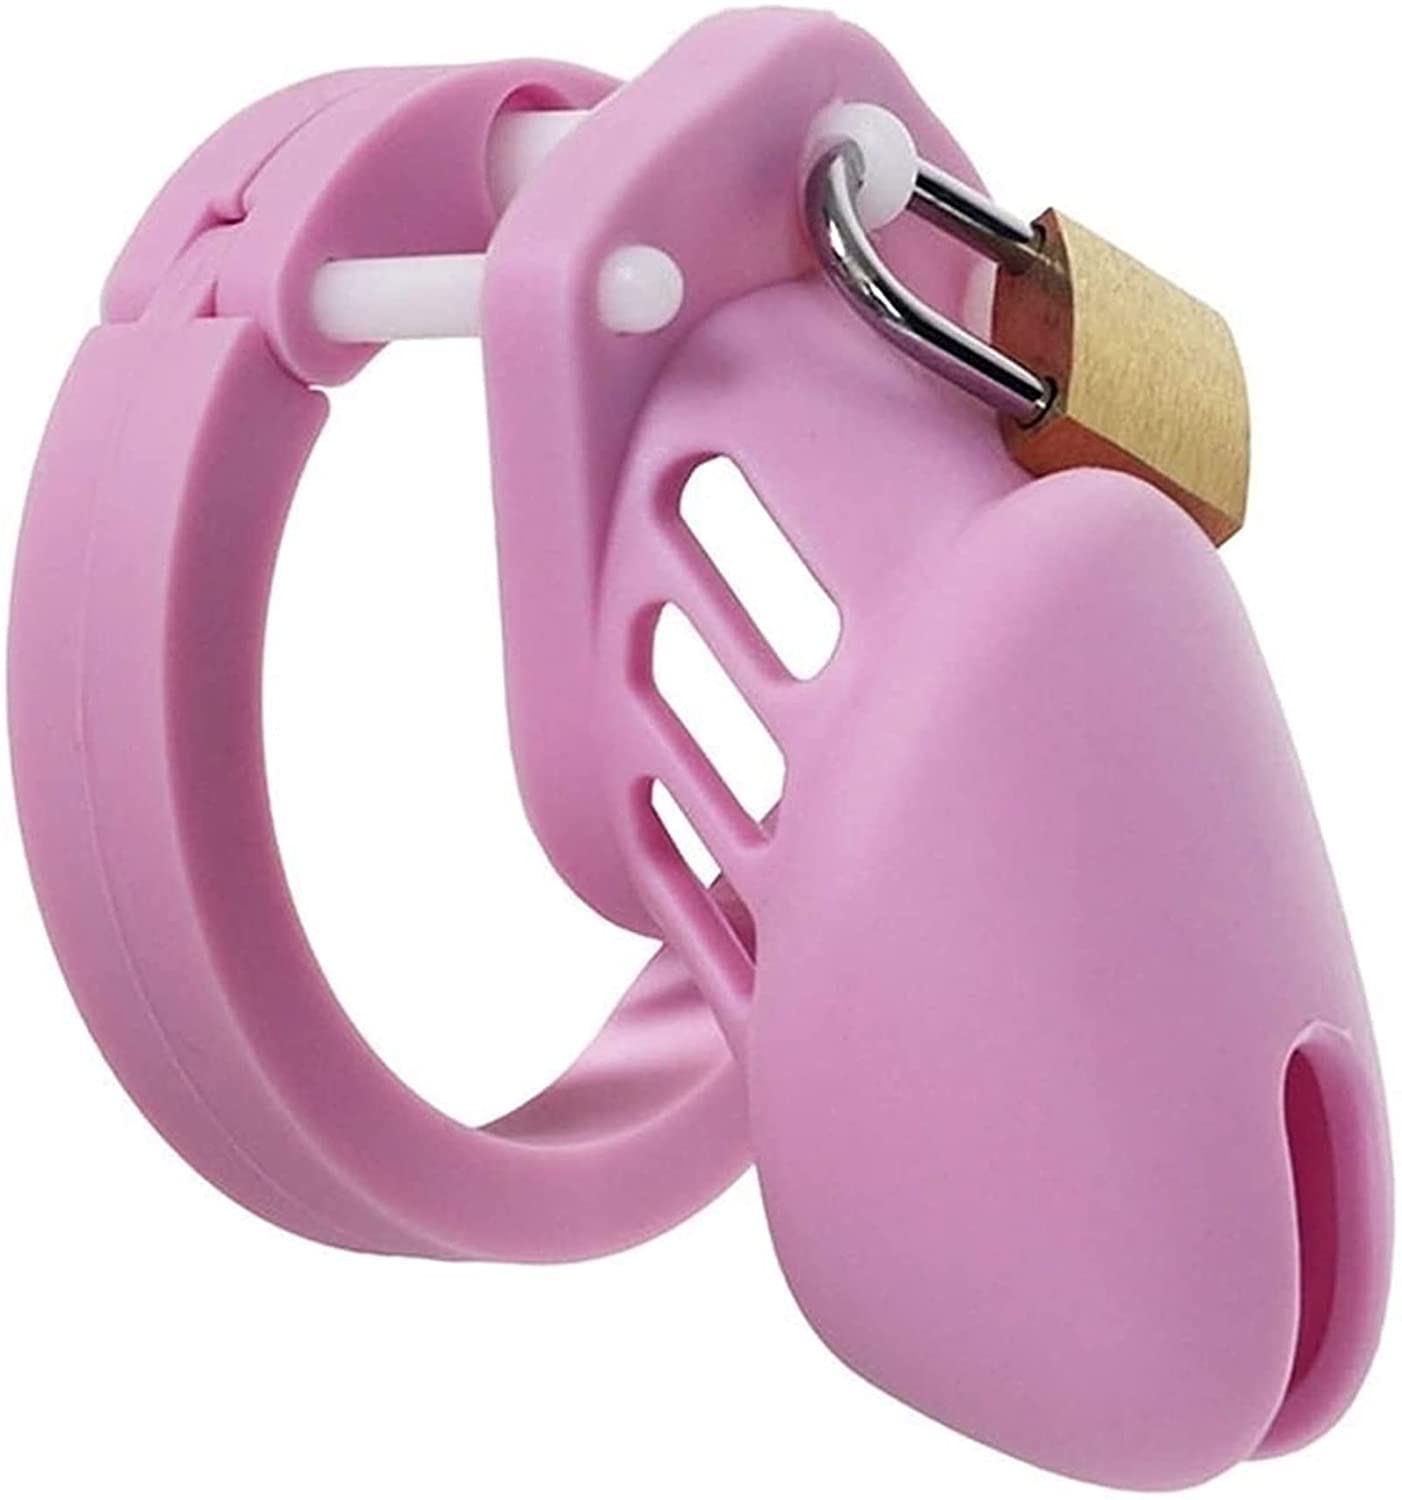 Cock Cage Male Chastity Device Locked Cage Sex Toy for Men,Key and Lock Included